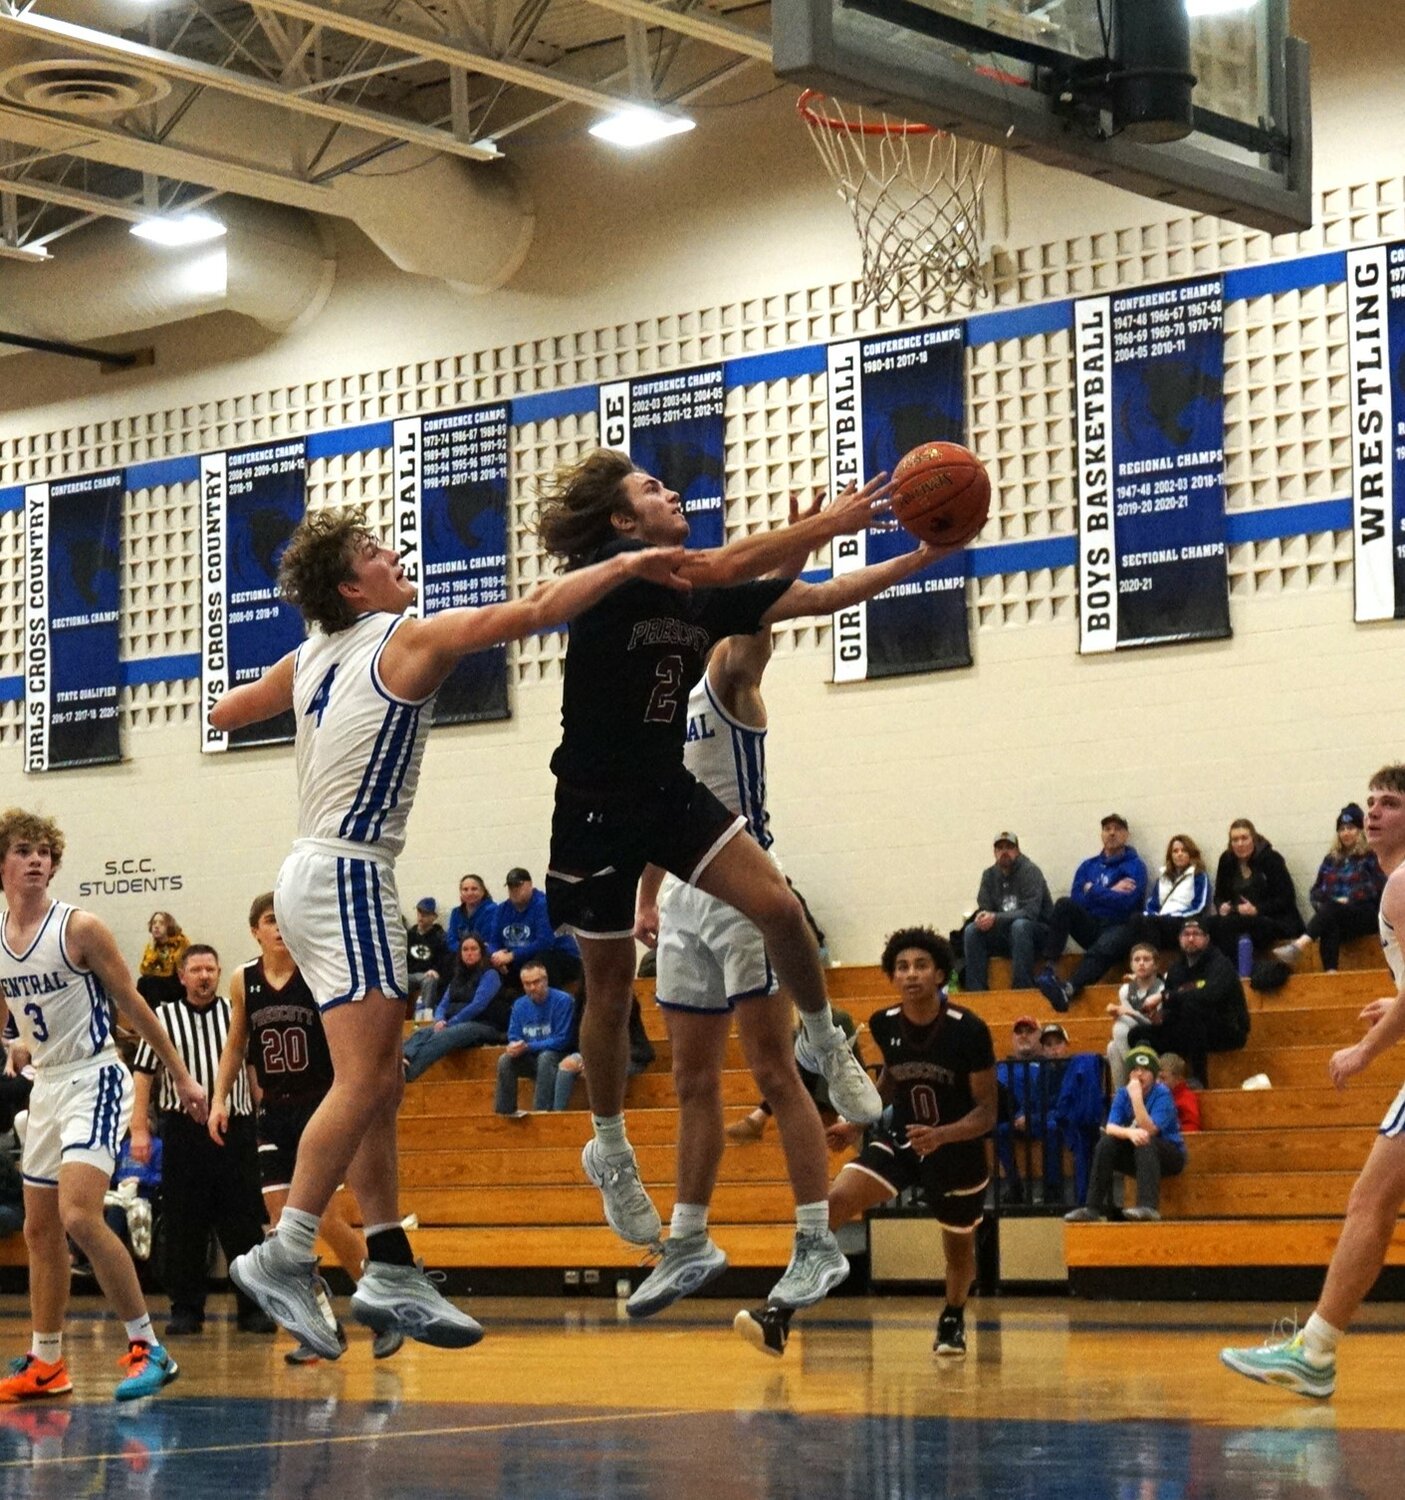 Kyle Cogan makes a contested layup in Prescott's last game against the Saint Croix Central Panthers.